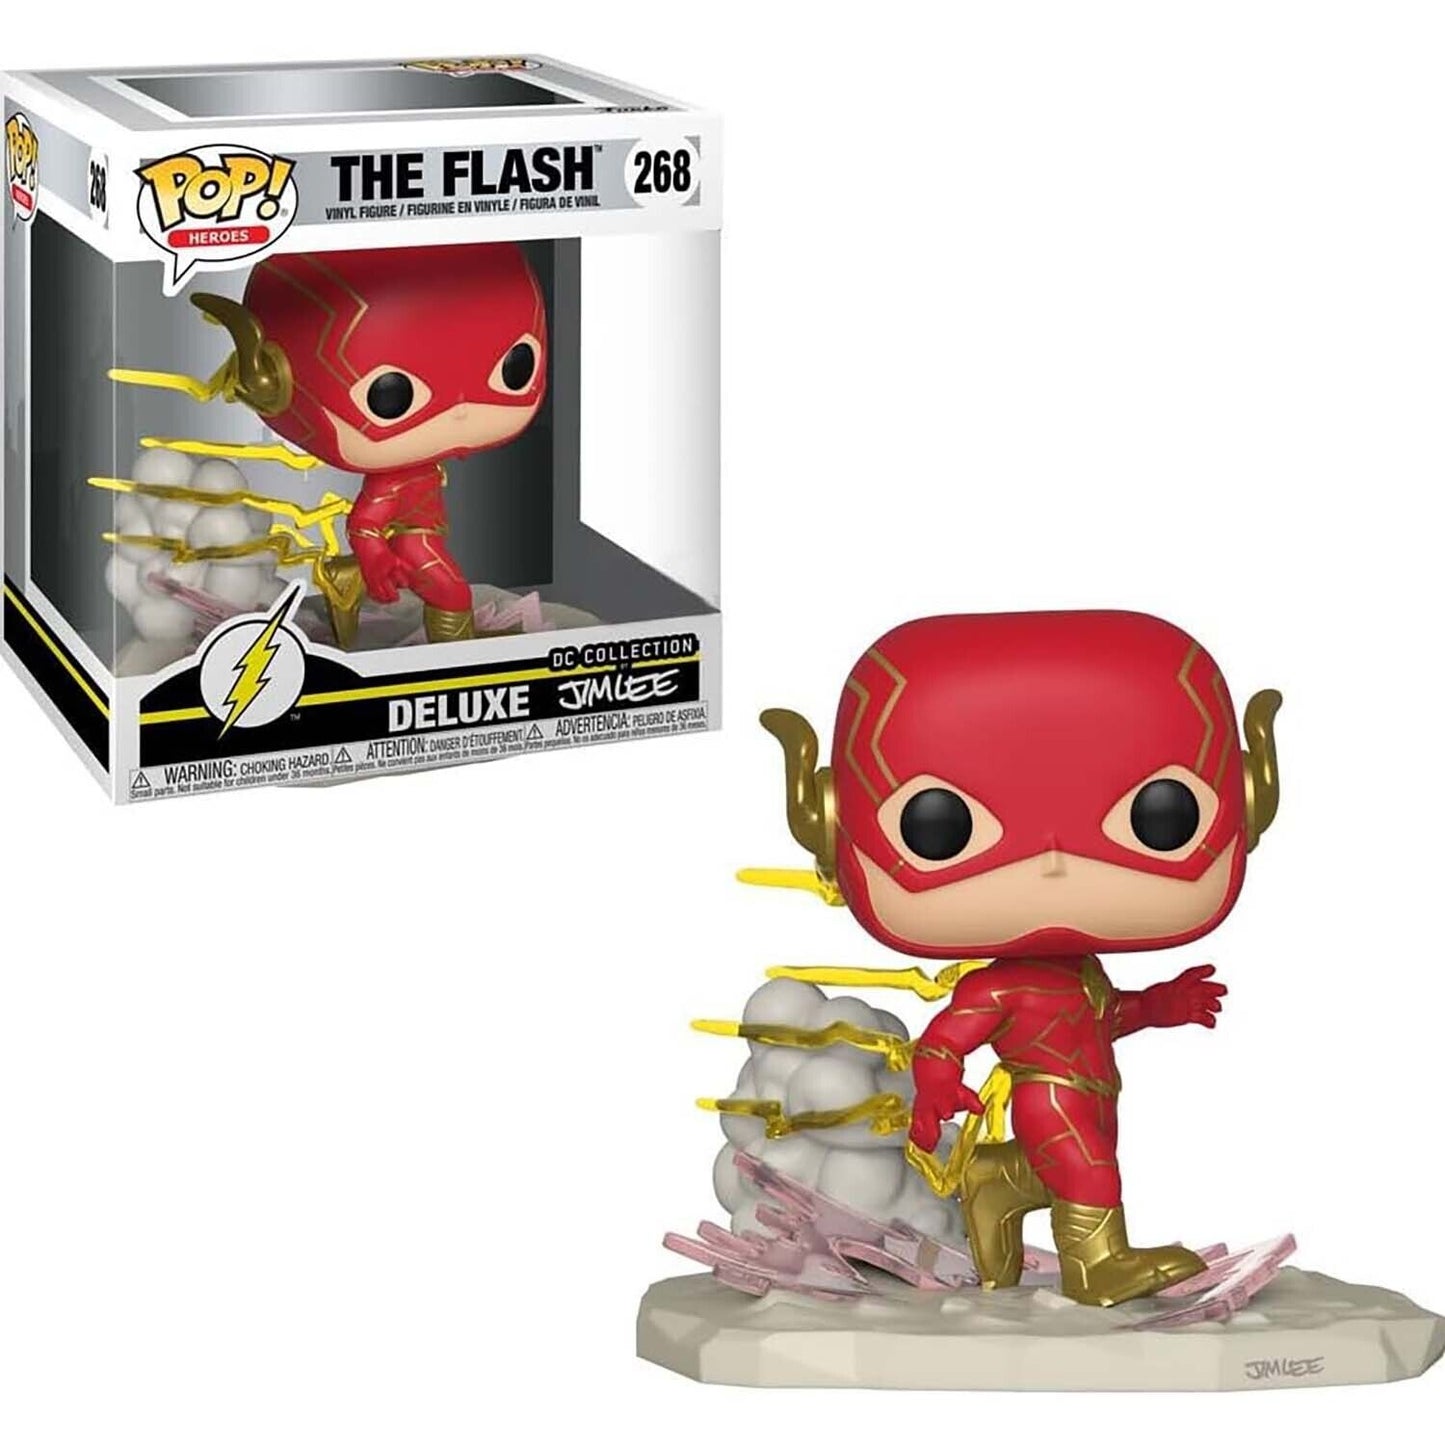 Funko Pop! Heroes #268 The Flash DC Collection Jim Lee Deluxe EB Exclusive